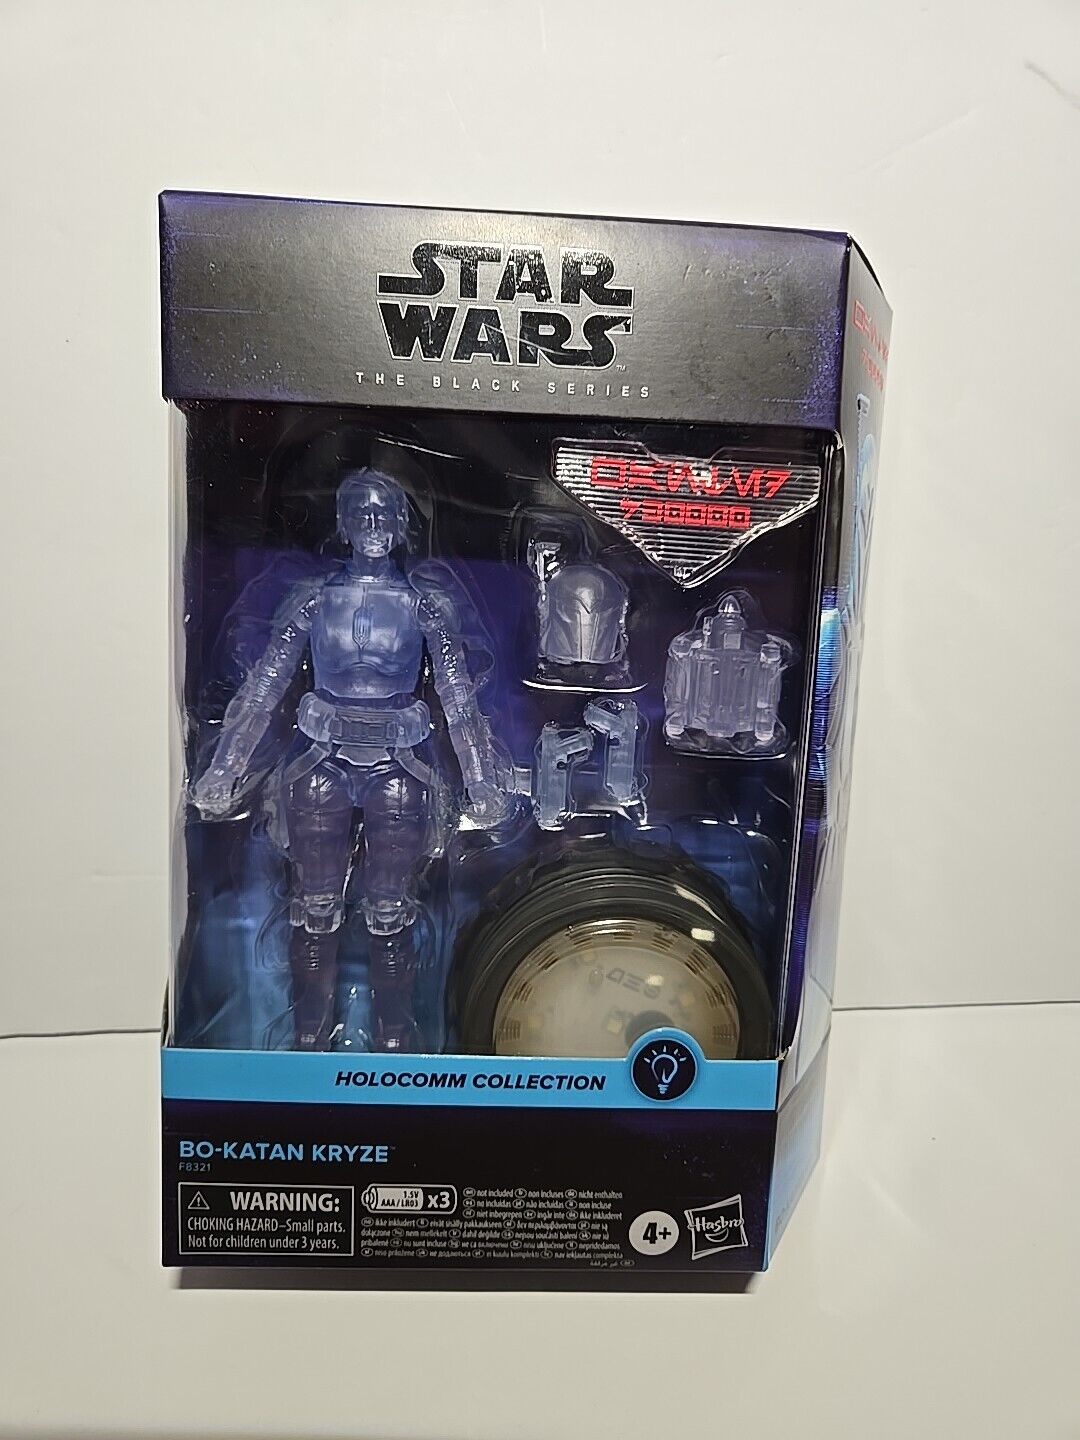 Star Wars Black Series Holocomm Collection The Mandalorian 